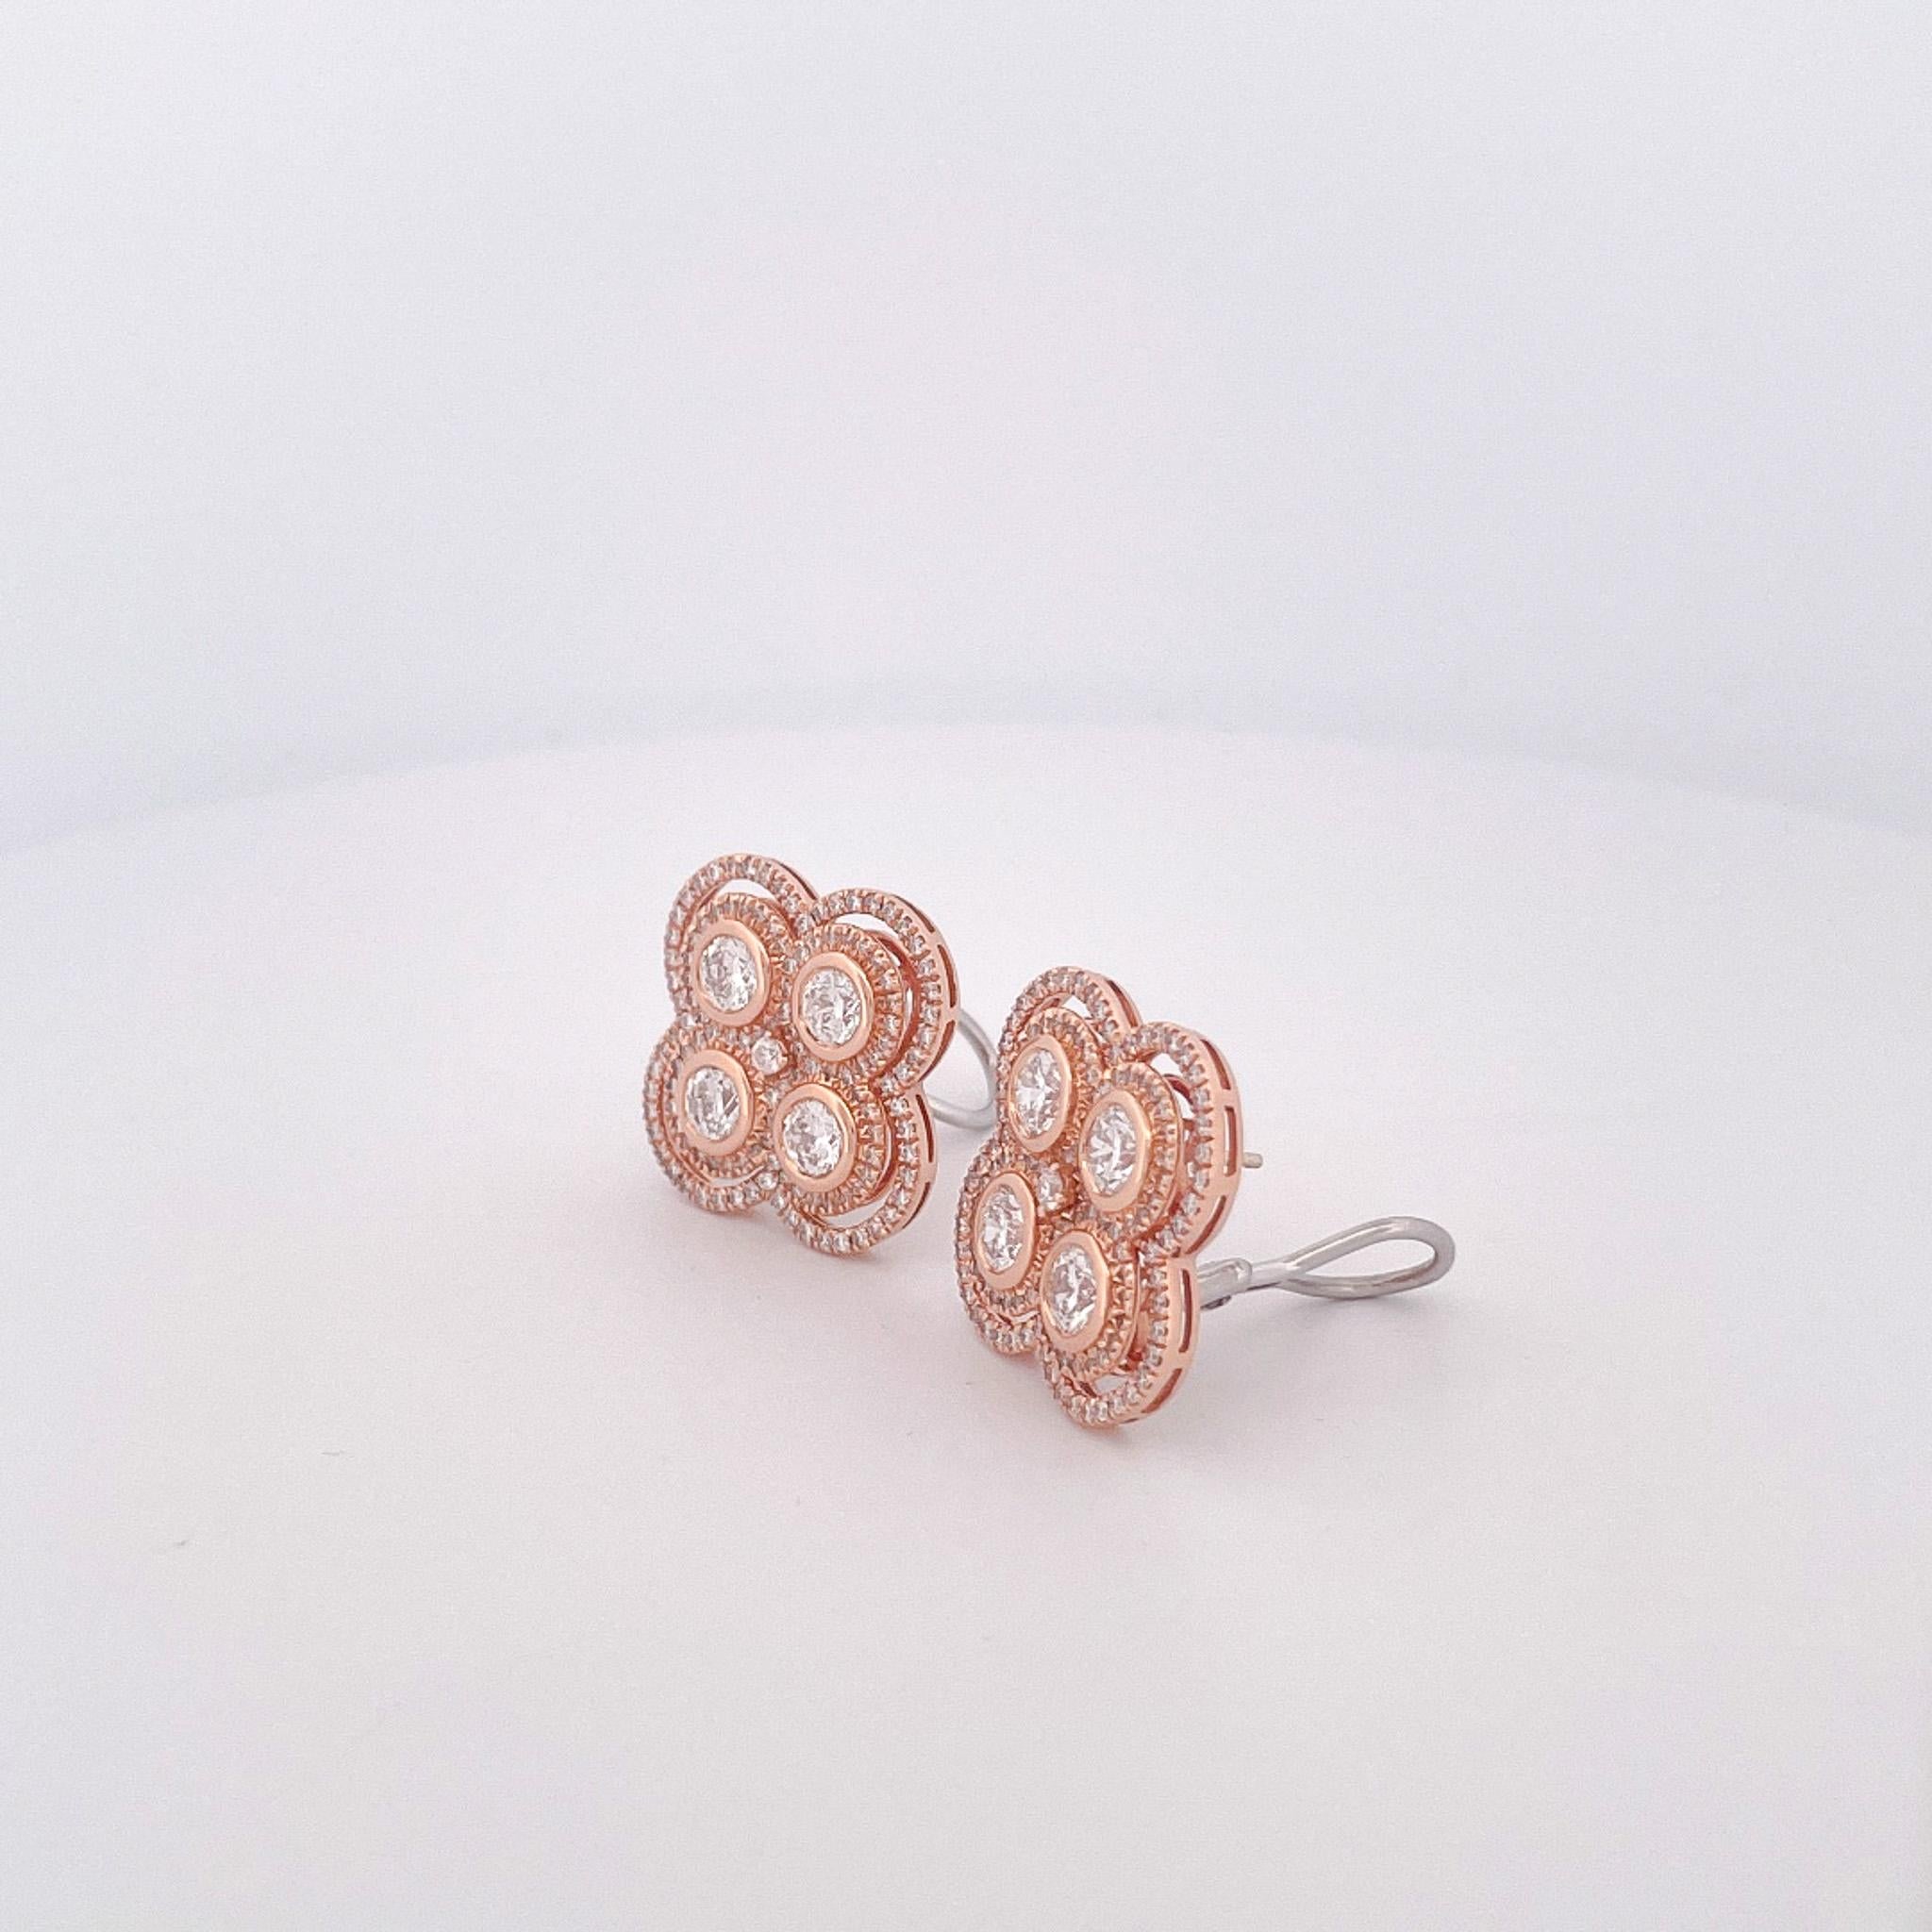 Estate Roberto Coin Cento Venetian 18k Rose Gold Diamond Oversized Stud Earrings In Excellent Condition For Sale In Dallas, TX